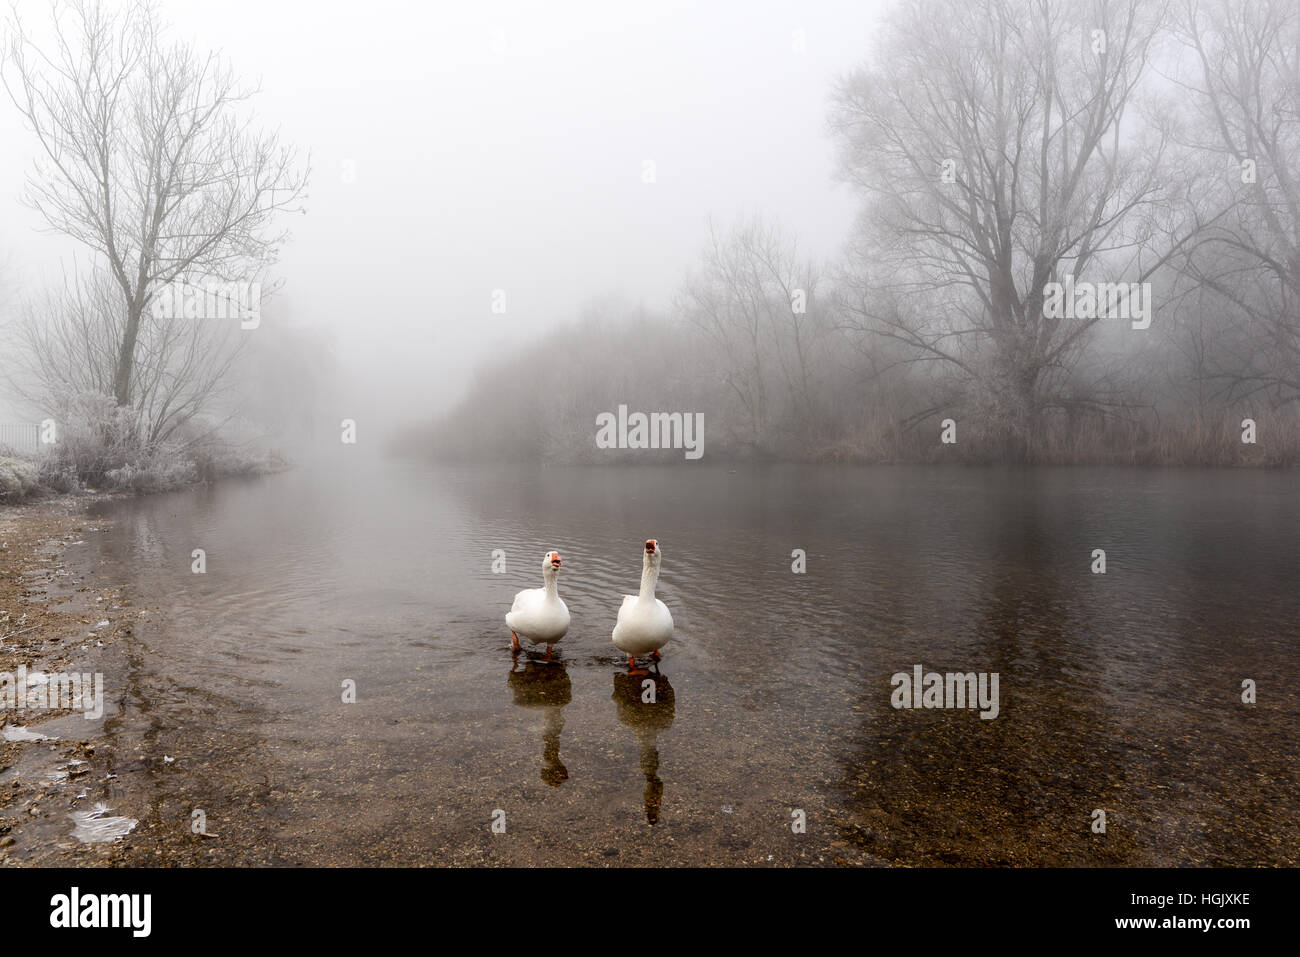 Freezing fog a devoted couple of white geese on the River Avon in the picturesque New Forest town of Fordingbridge, Hampshire, UK Stock Photo